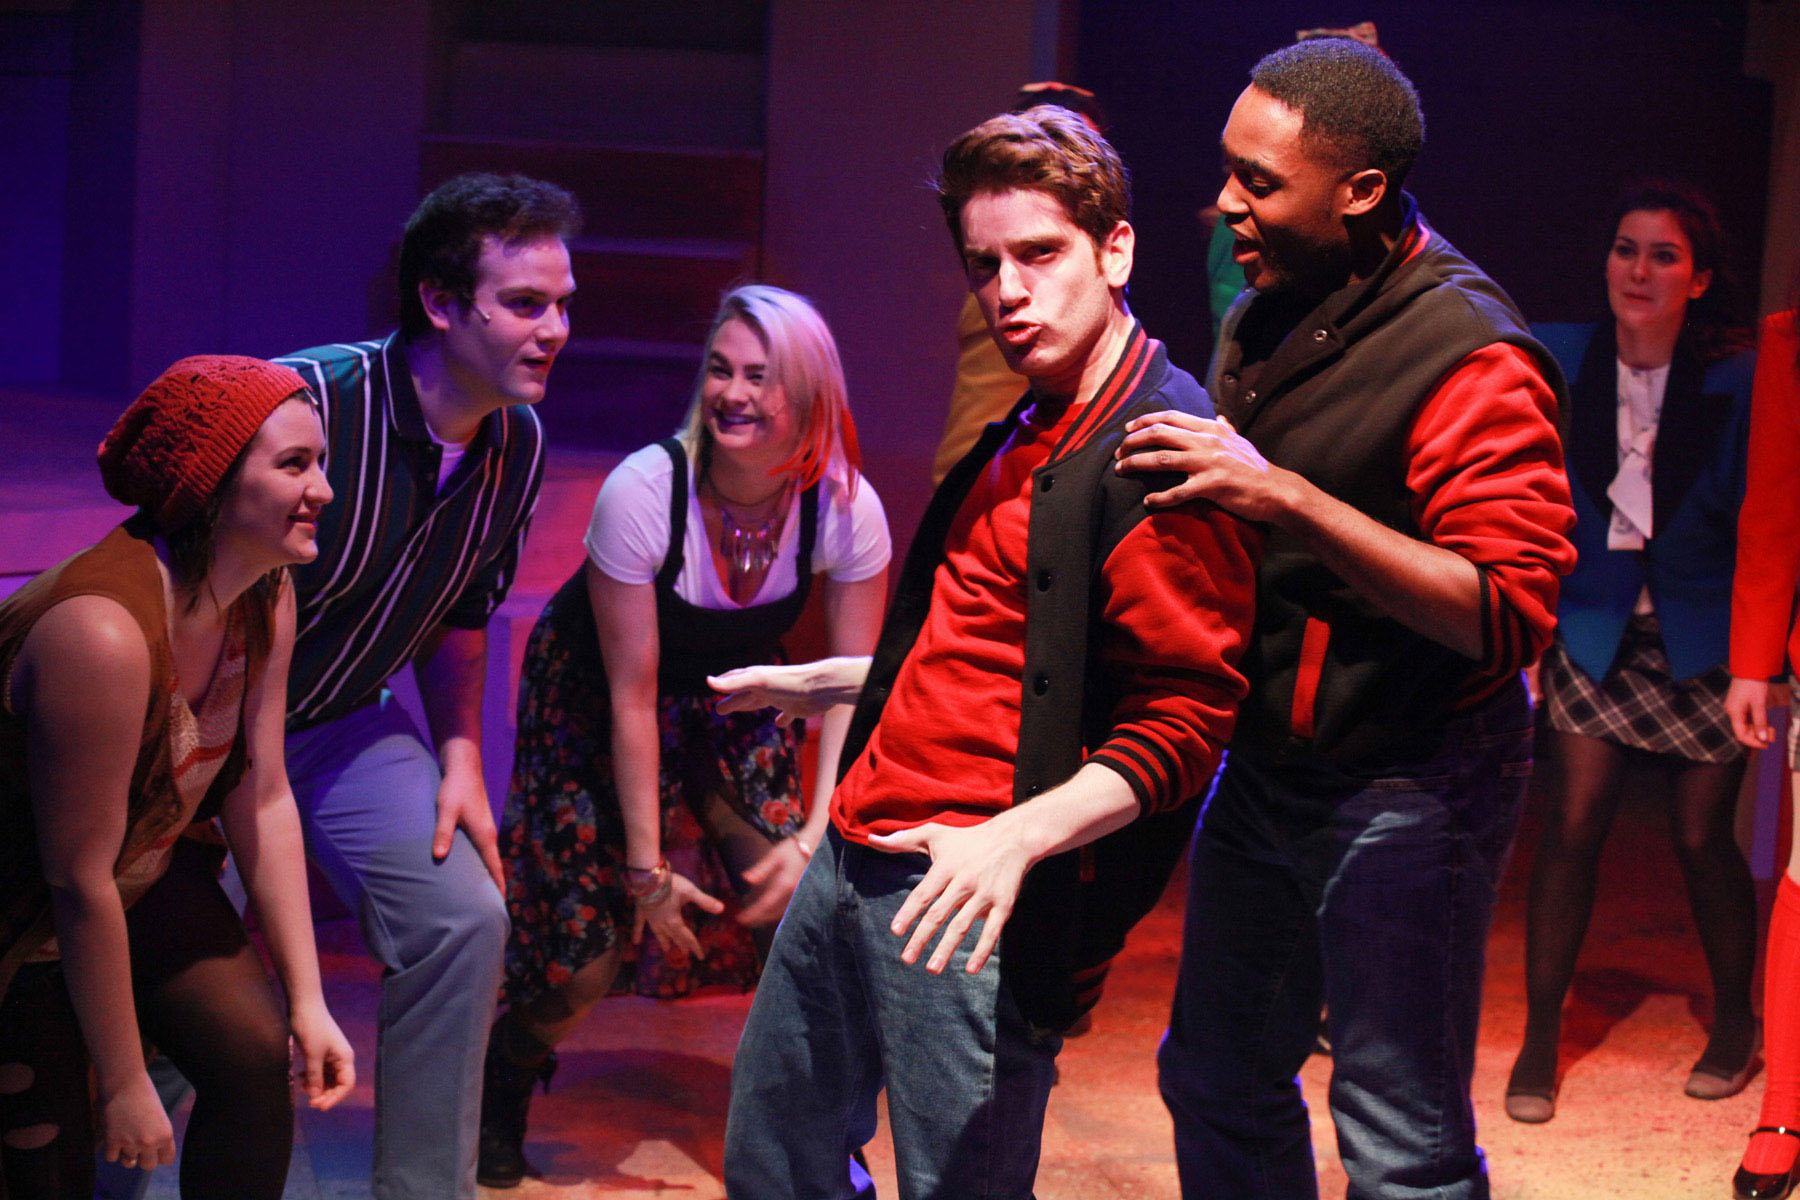 Kokandy Productions' HEATHERS: THE MUSICAL - Through April 24, 2016 at Theater Wit 1 Kokandy Productions is pleased to launch its 2016 season with the Chicago premiere of the dark “mean teen” comedy HEATHERS: THE MUSICAL, based on the hit 1980s cult film of the same name, from the award winning-team of creative team of Kevin Murphy (Reefer Madness, Desperate Housewives) and Laurence O'Keefe (Bat Boy, Legally Blonde). Directed by James Beaudry, with music direction by Kory Danielson and choreography by Sawyer Smith, HEATHERS: THE MUSICAL will play February 28 – April 24, 2016 at Theater Wit, 1229 W. Belmont Ave. in Chicago. Tickets for HEATHERS: THE MUSICAL are currently available at www.kokandyproductions.com, by calling (773) 975-8150 or in person at the Theater Wit Box Office.